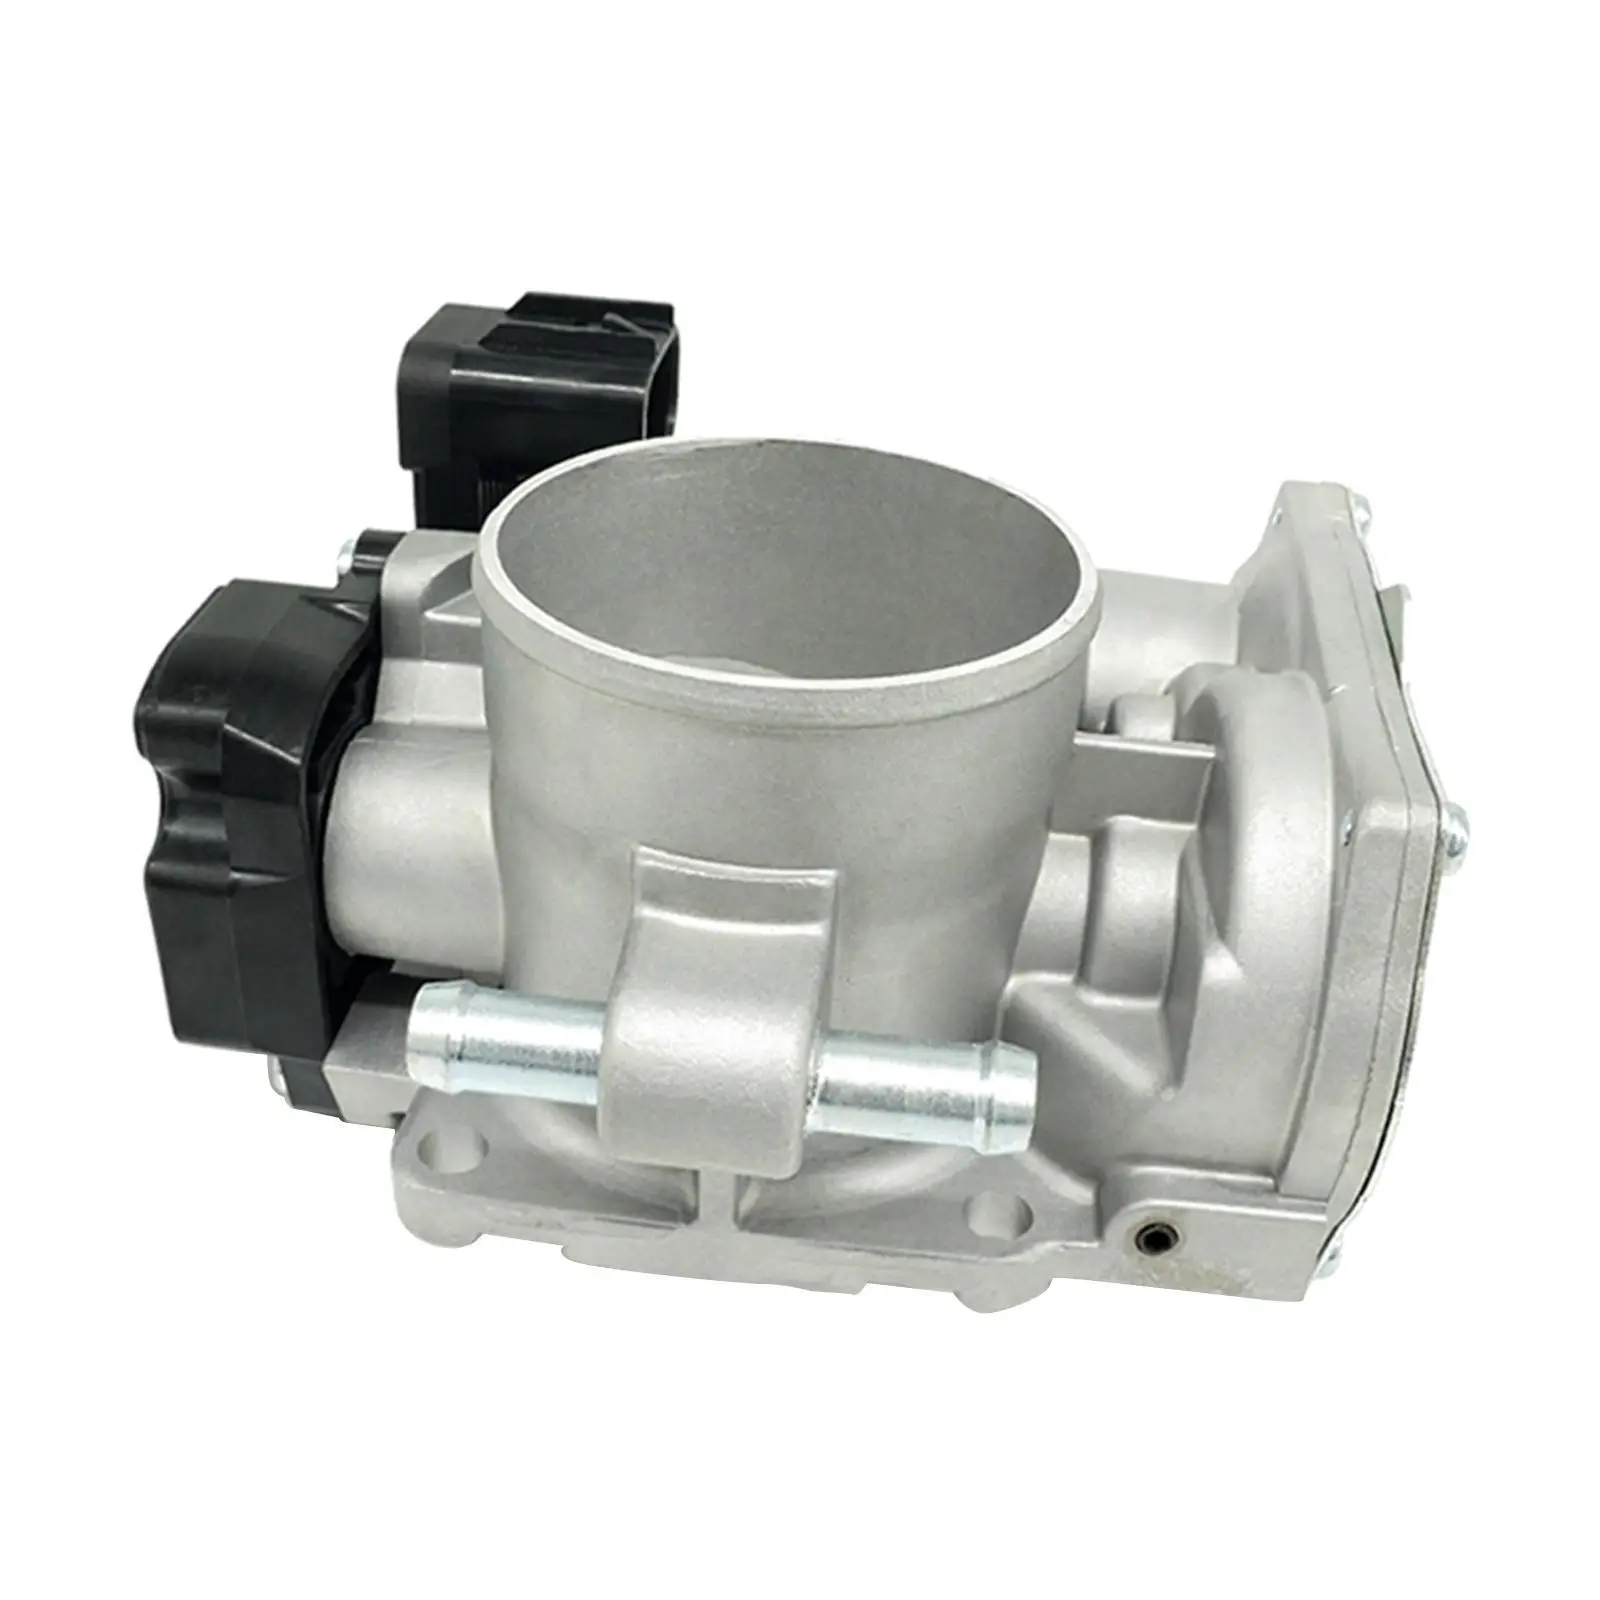 25368821 Throttle Body Assembly Fit for   4 2.06-2008 Vehicles 